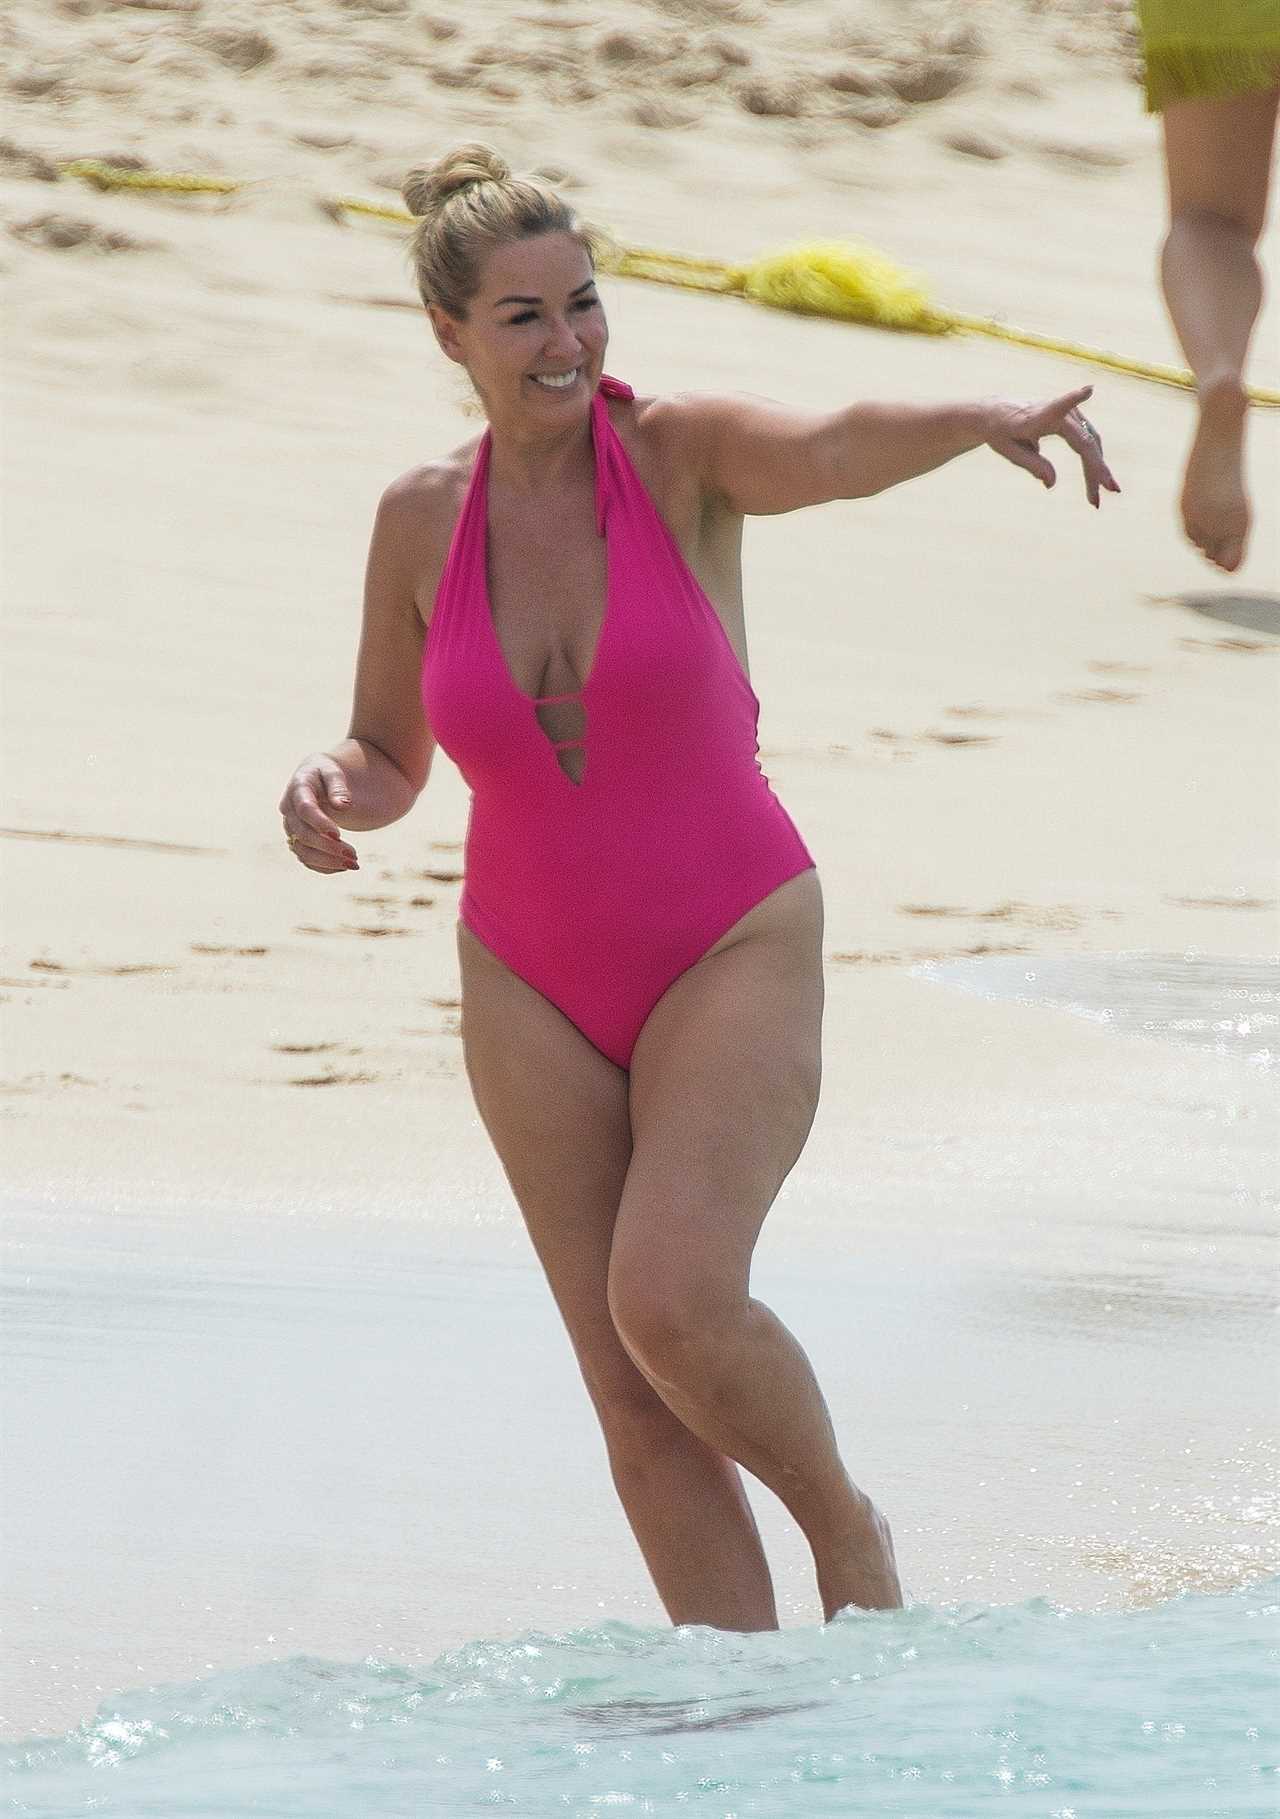 Claire Sweeney, 51, looks incredible as she hits the beach in Barbados in a bright pink swimsuit